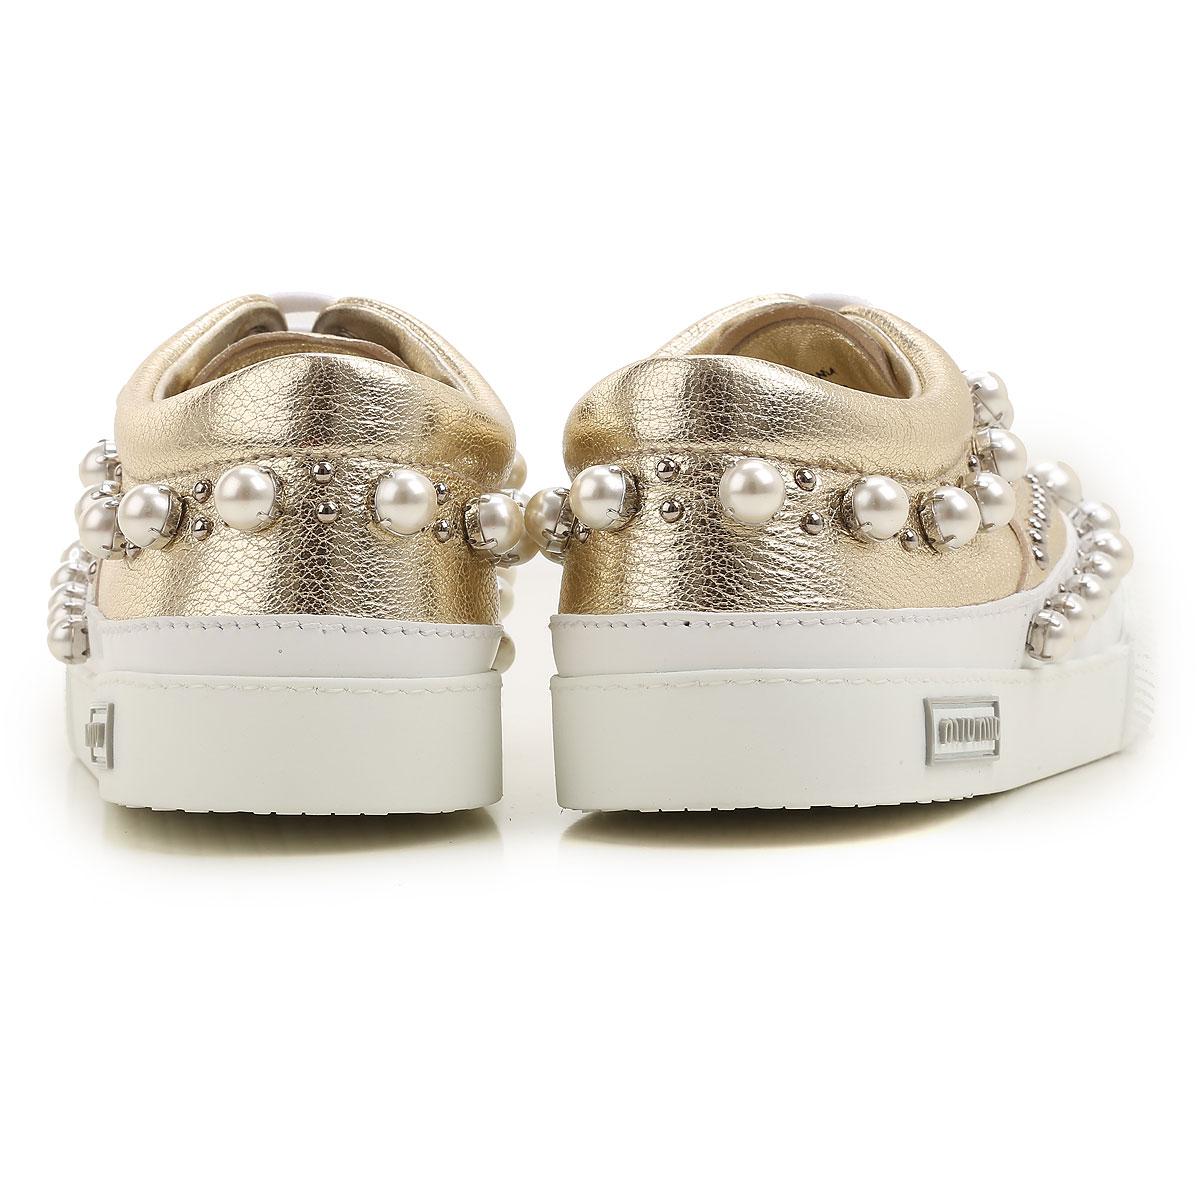 Miu Miu Sneakers For Women On Sale In Outlet in White - Lyst